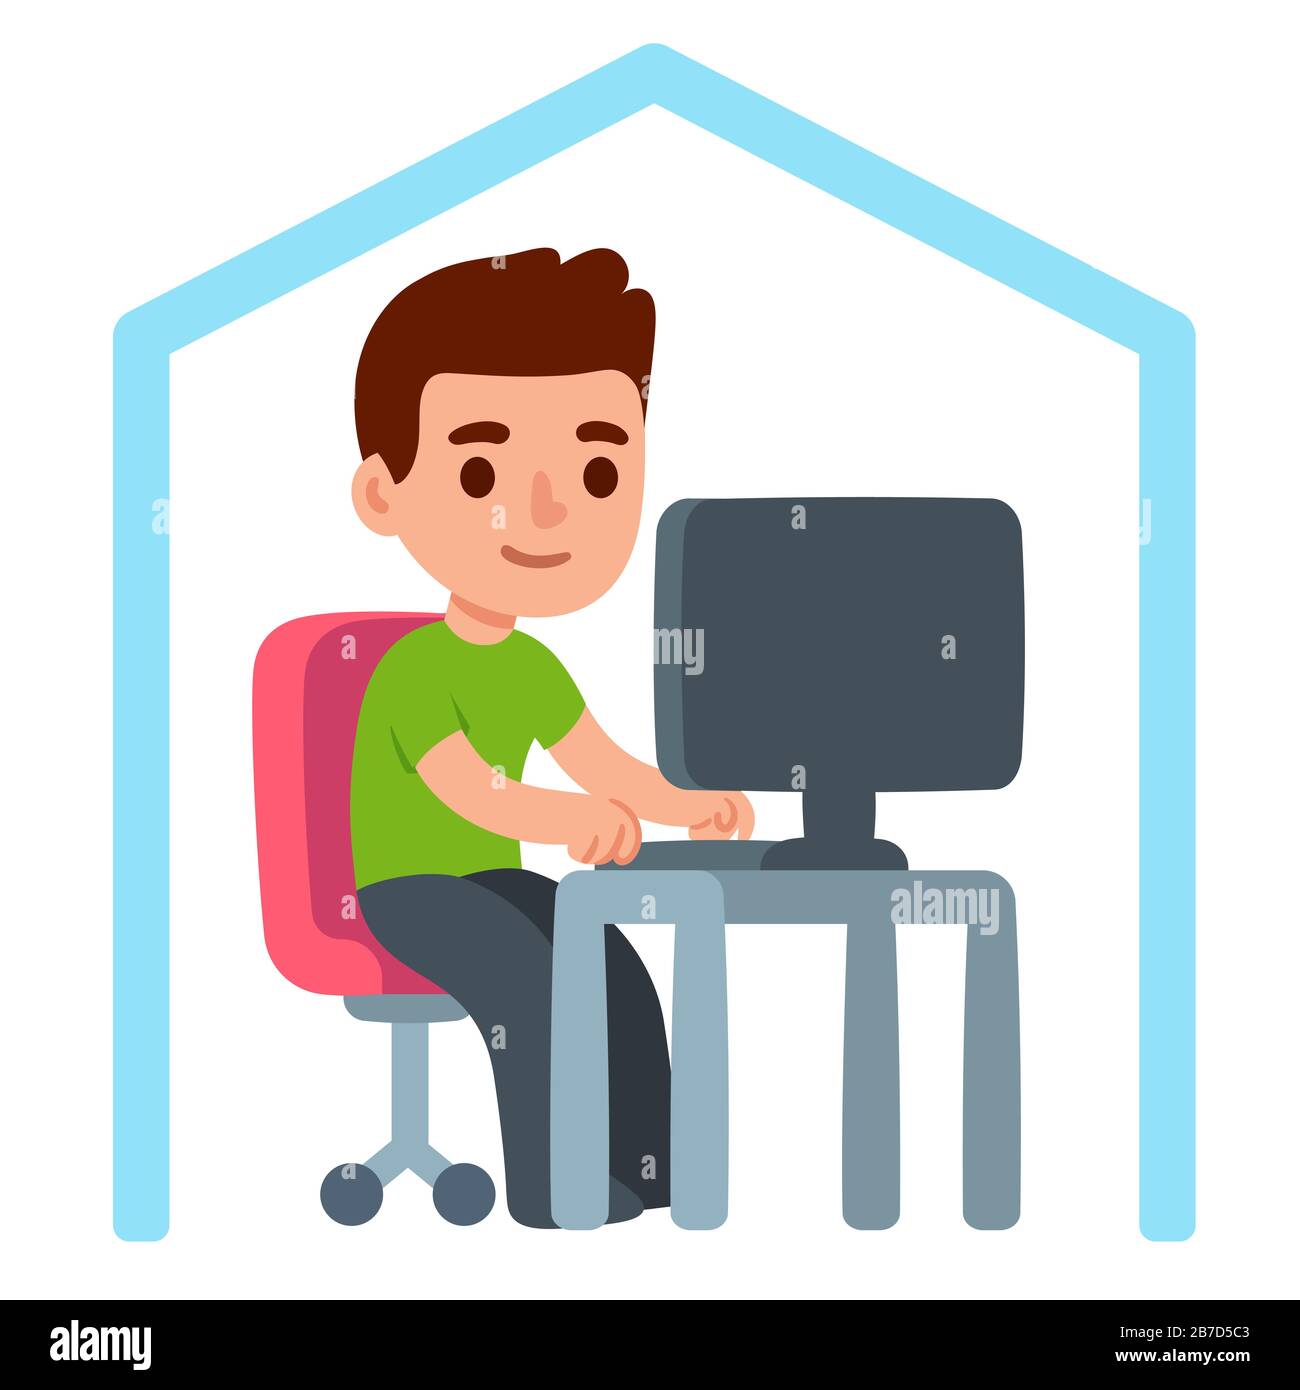 Cute cartoon character working from home. Remote work and telecommuting, or freelance job. Isolated vector clip art illustration in simple flat style. Stock Vector